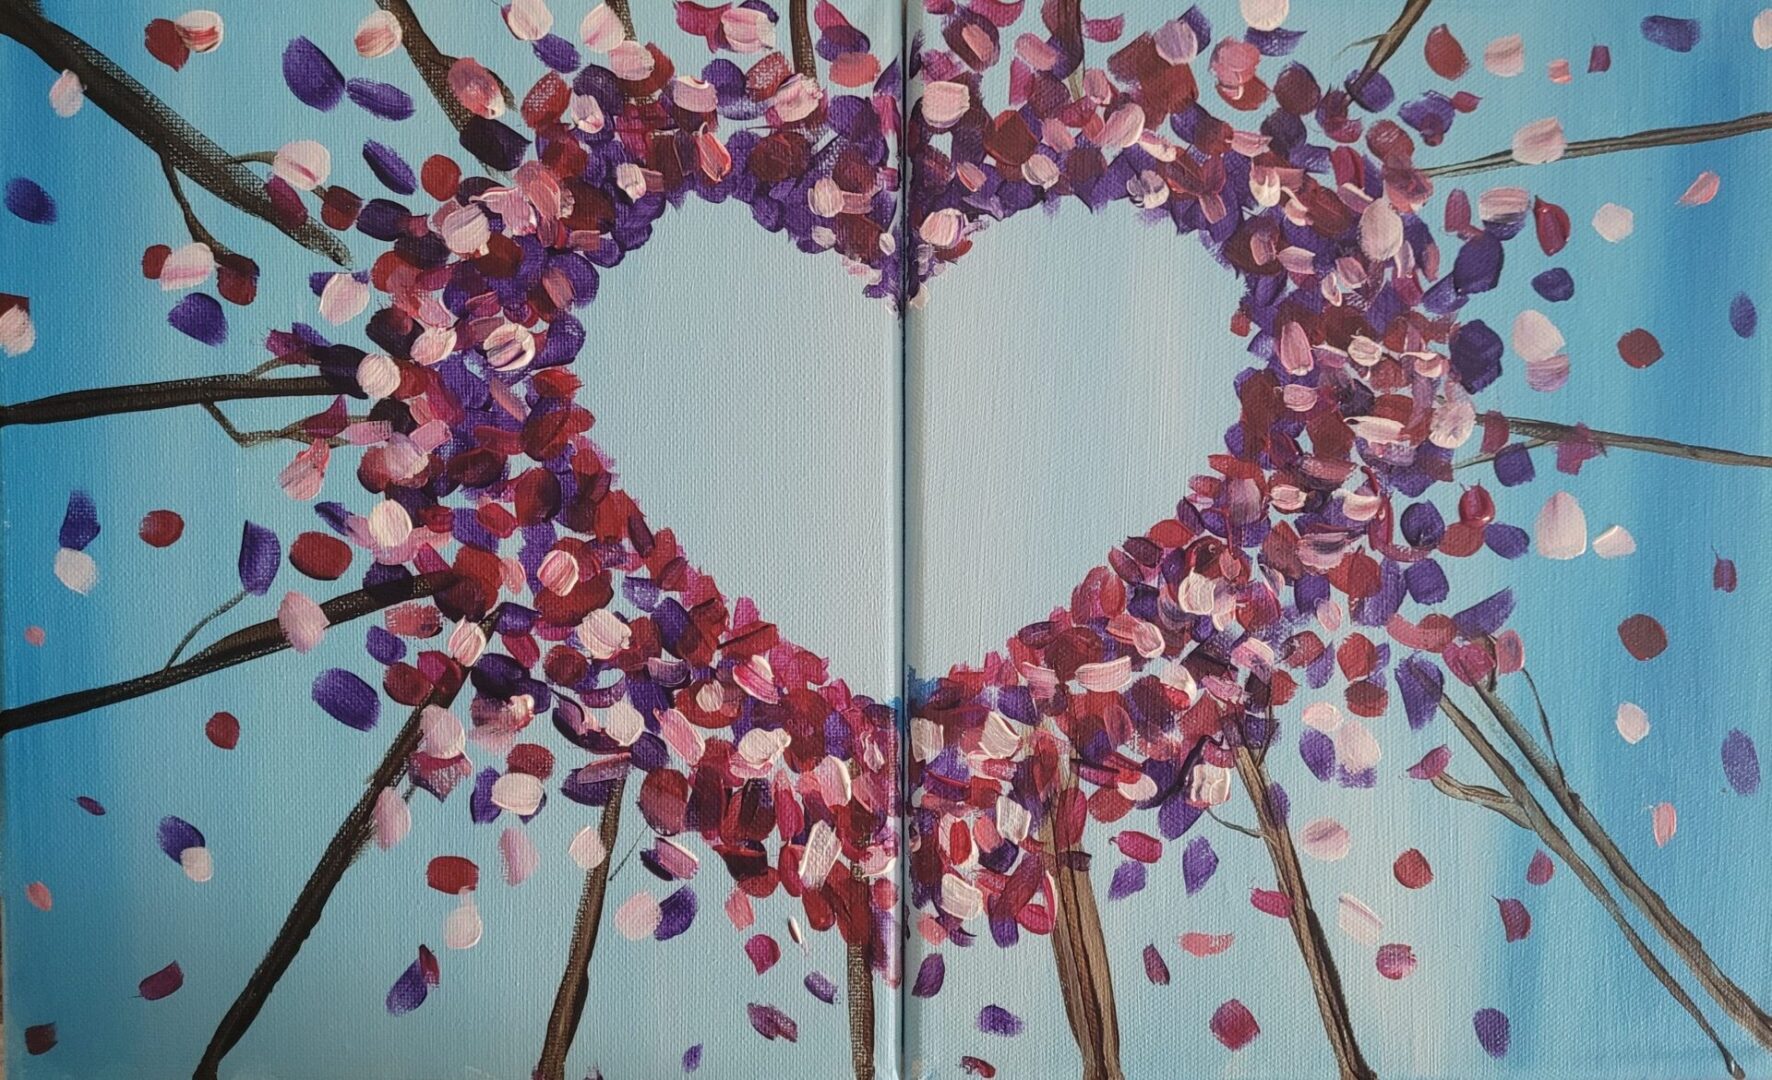 A Spring Heart Painting With Pink and Purple Petals